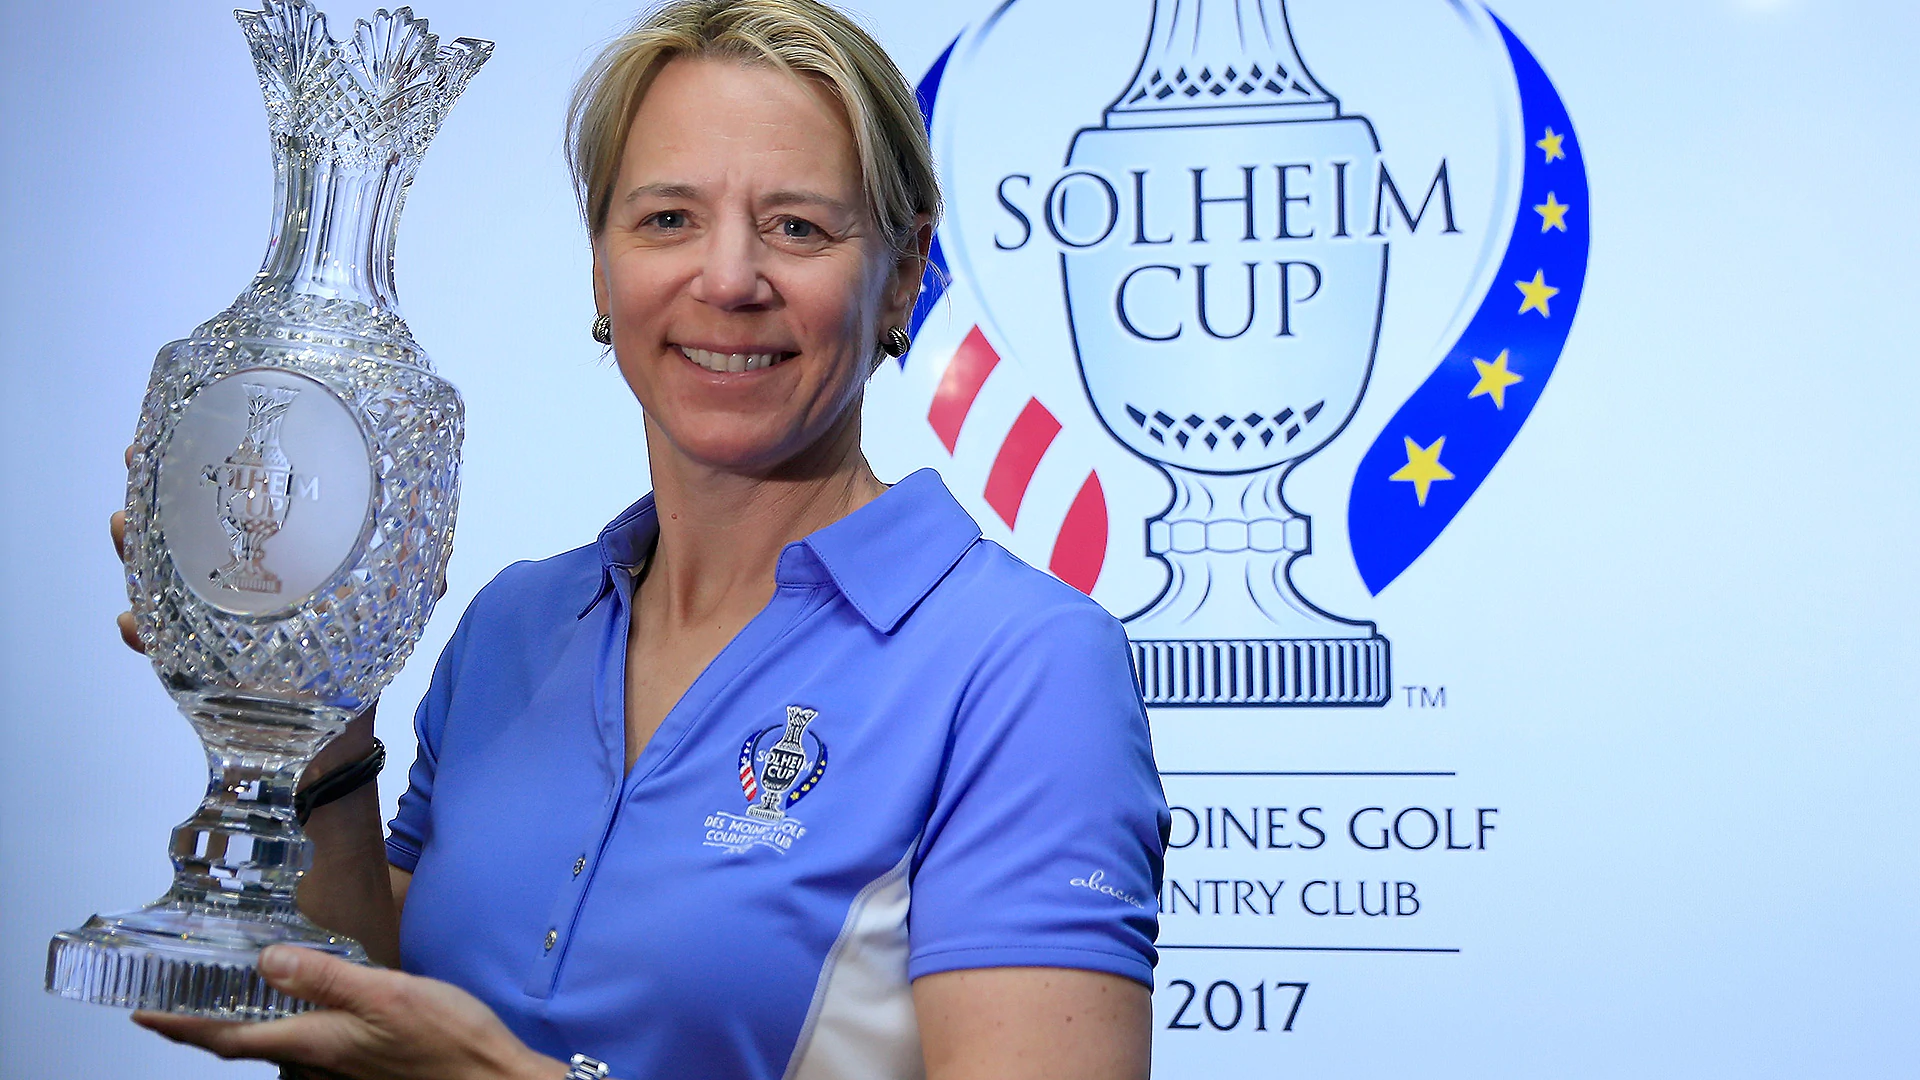 Euros in contention at WBO bodes well for Solheim prospects